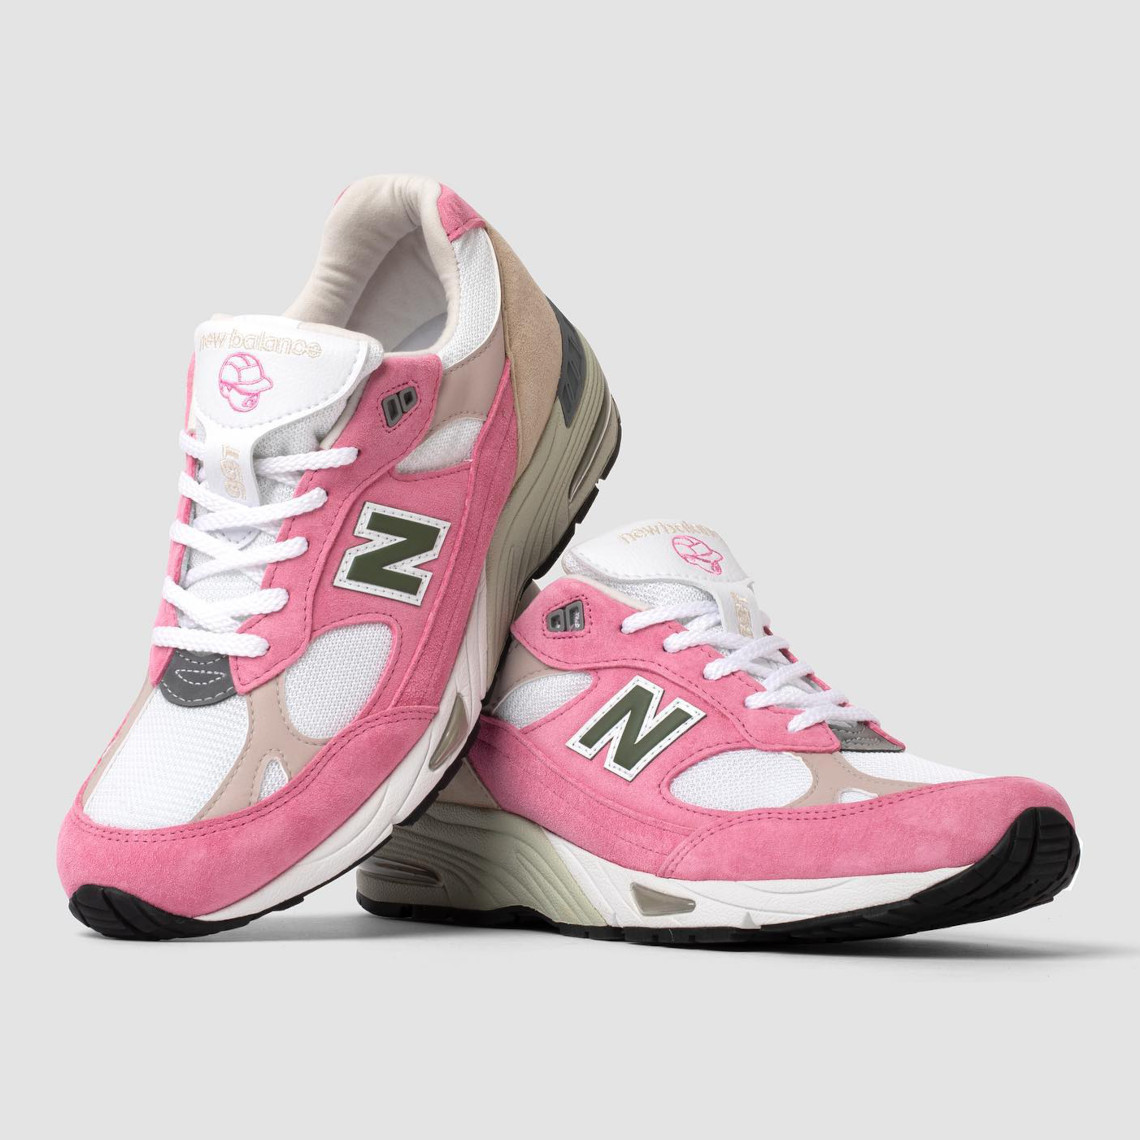 All Gone 2021 Paperboy Paris New Balance Mujer 574 in Negro Gris 4